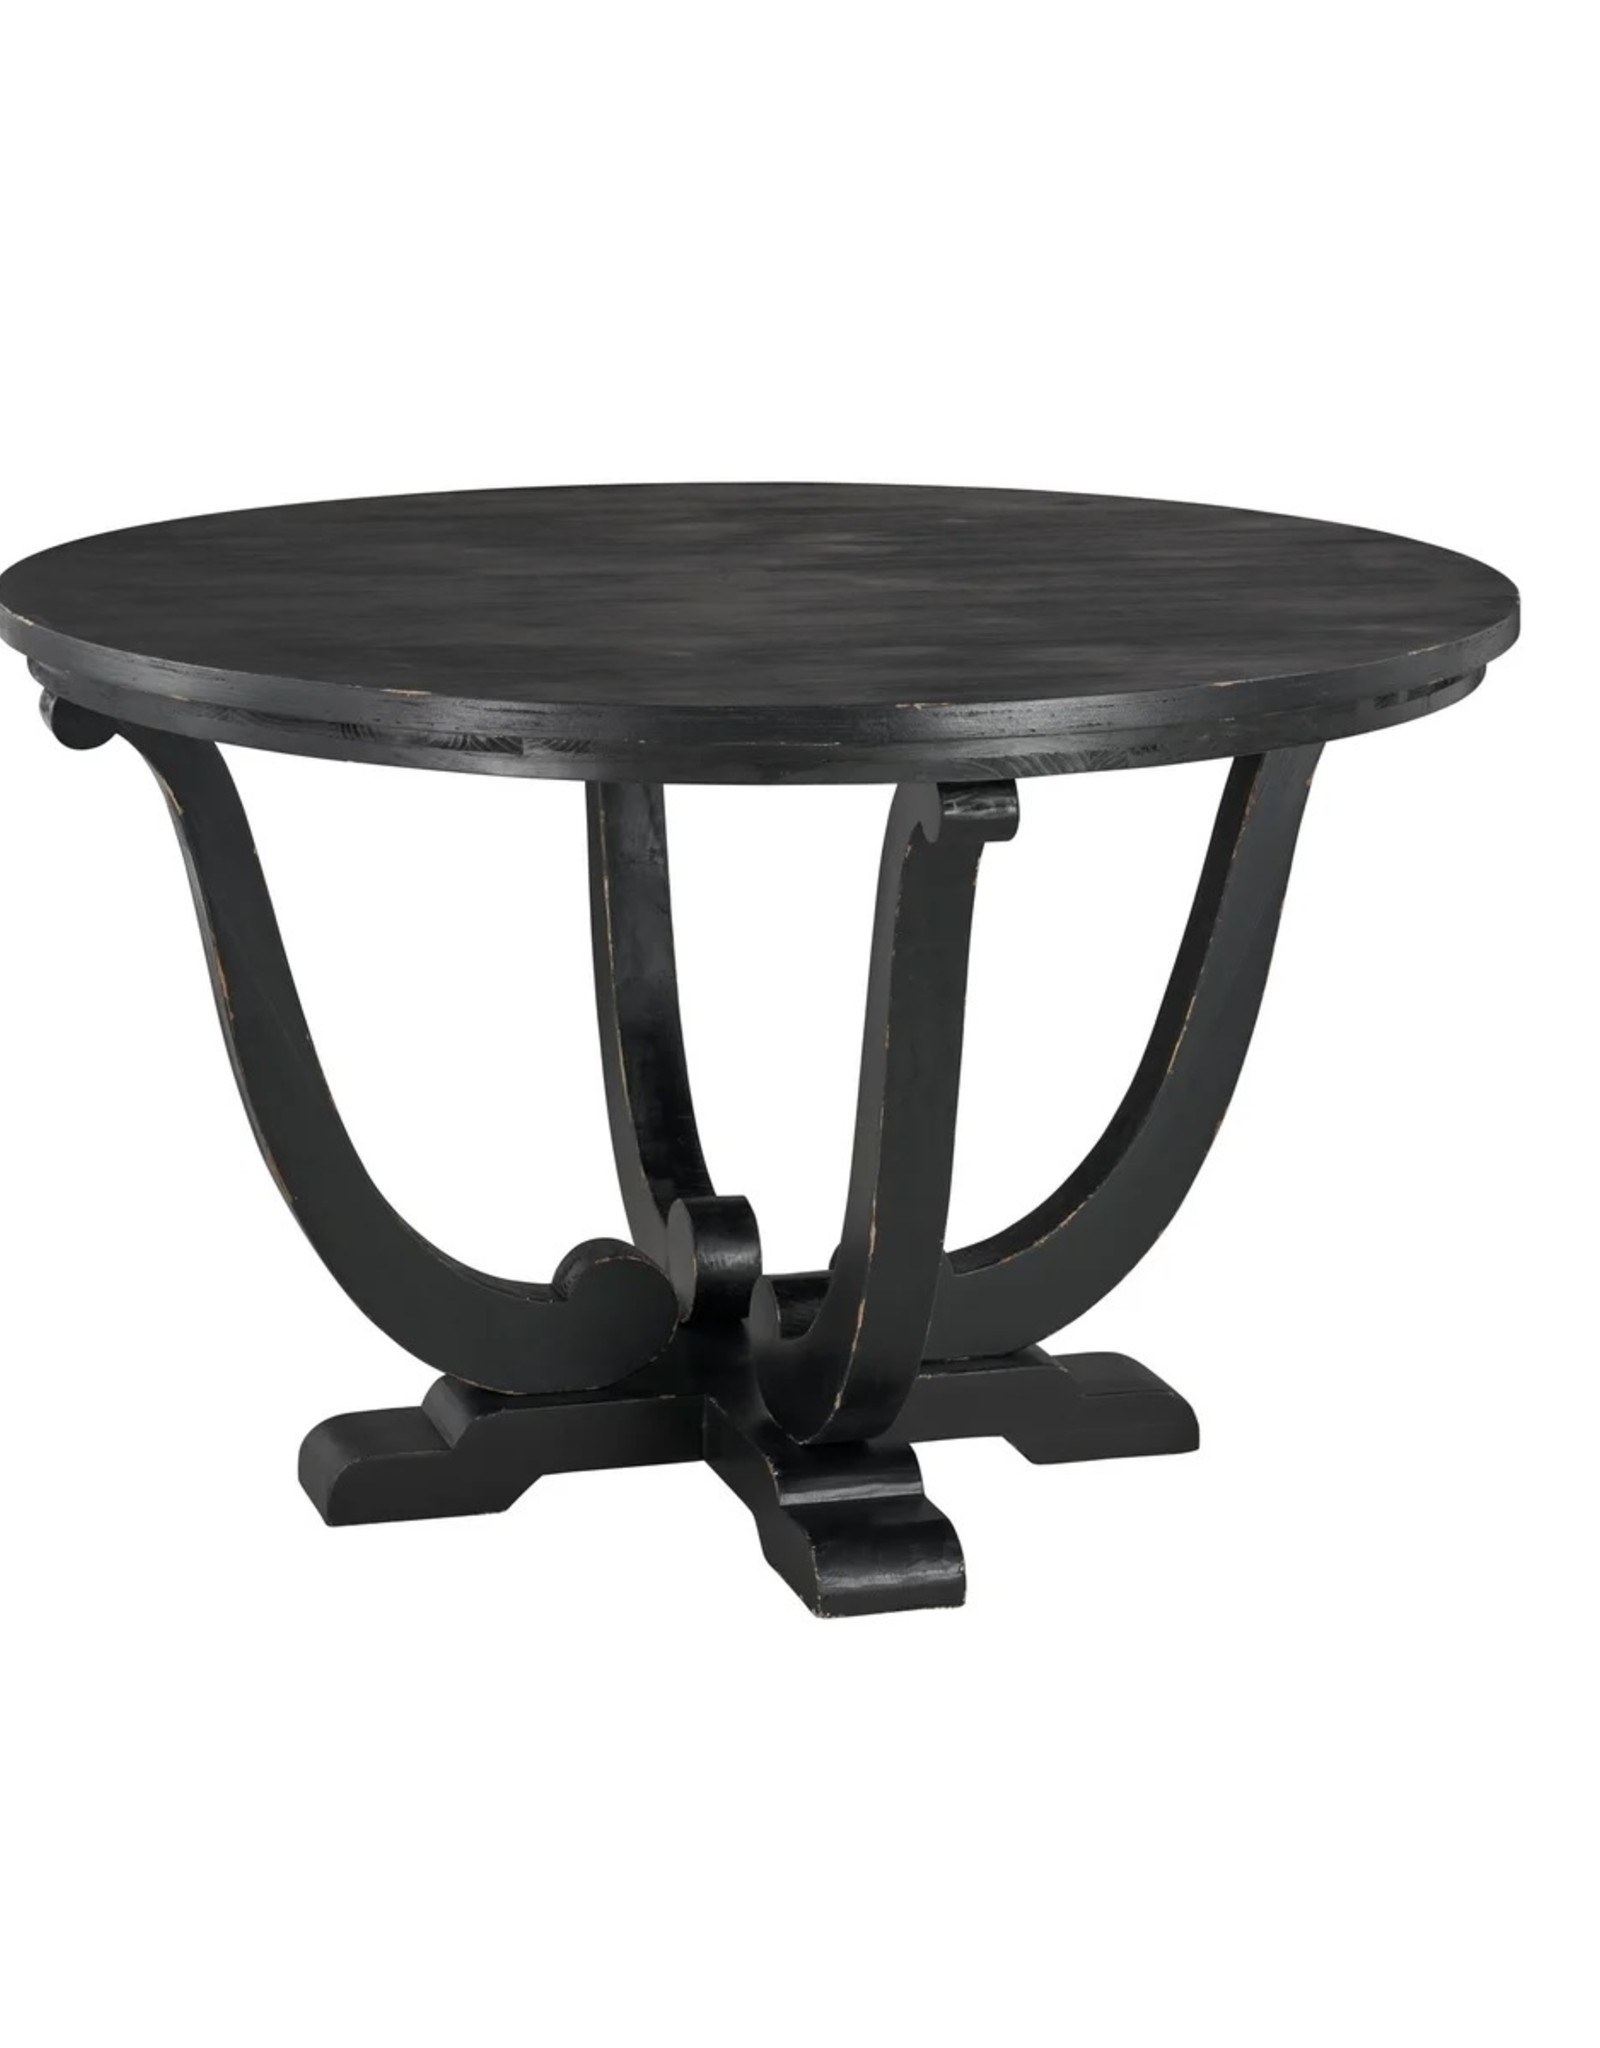 Forty West Designs Parker Dining Room Table 48" - Weatherwood